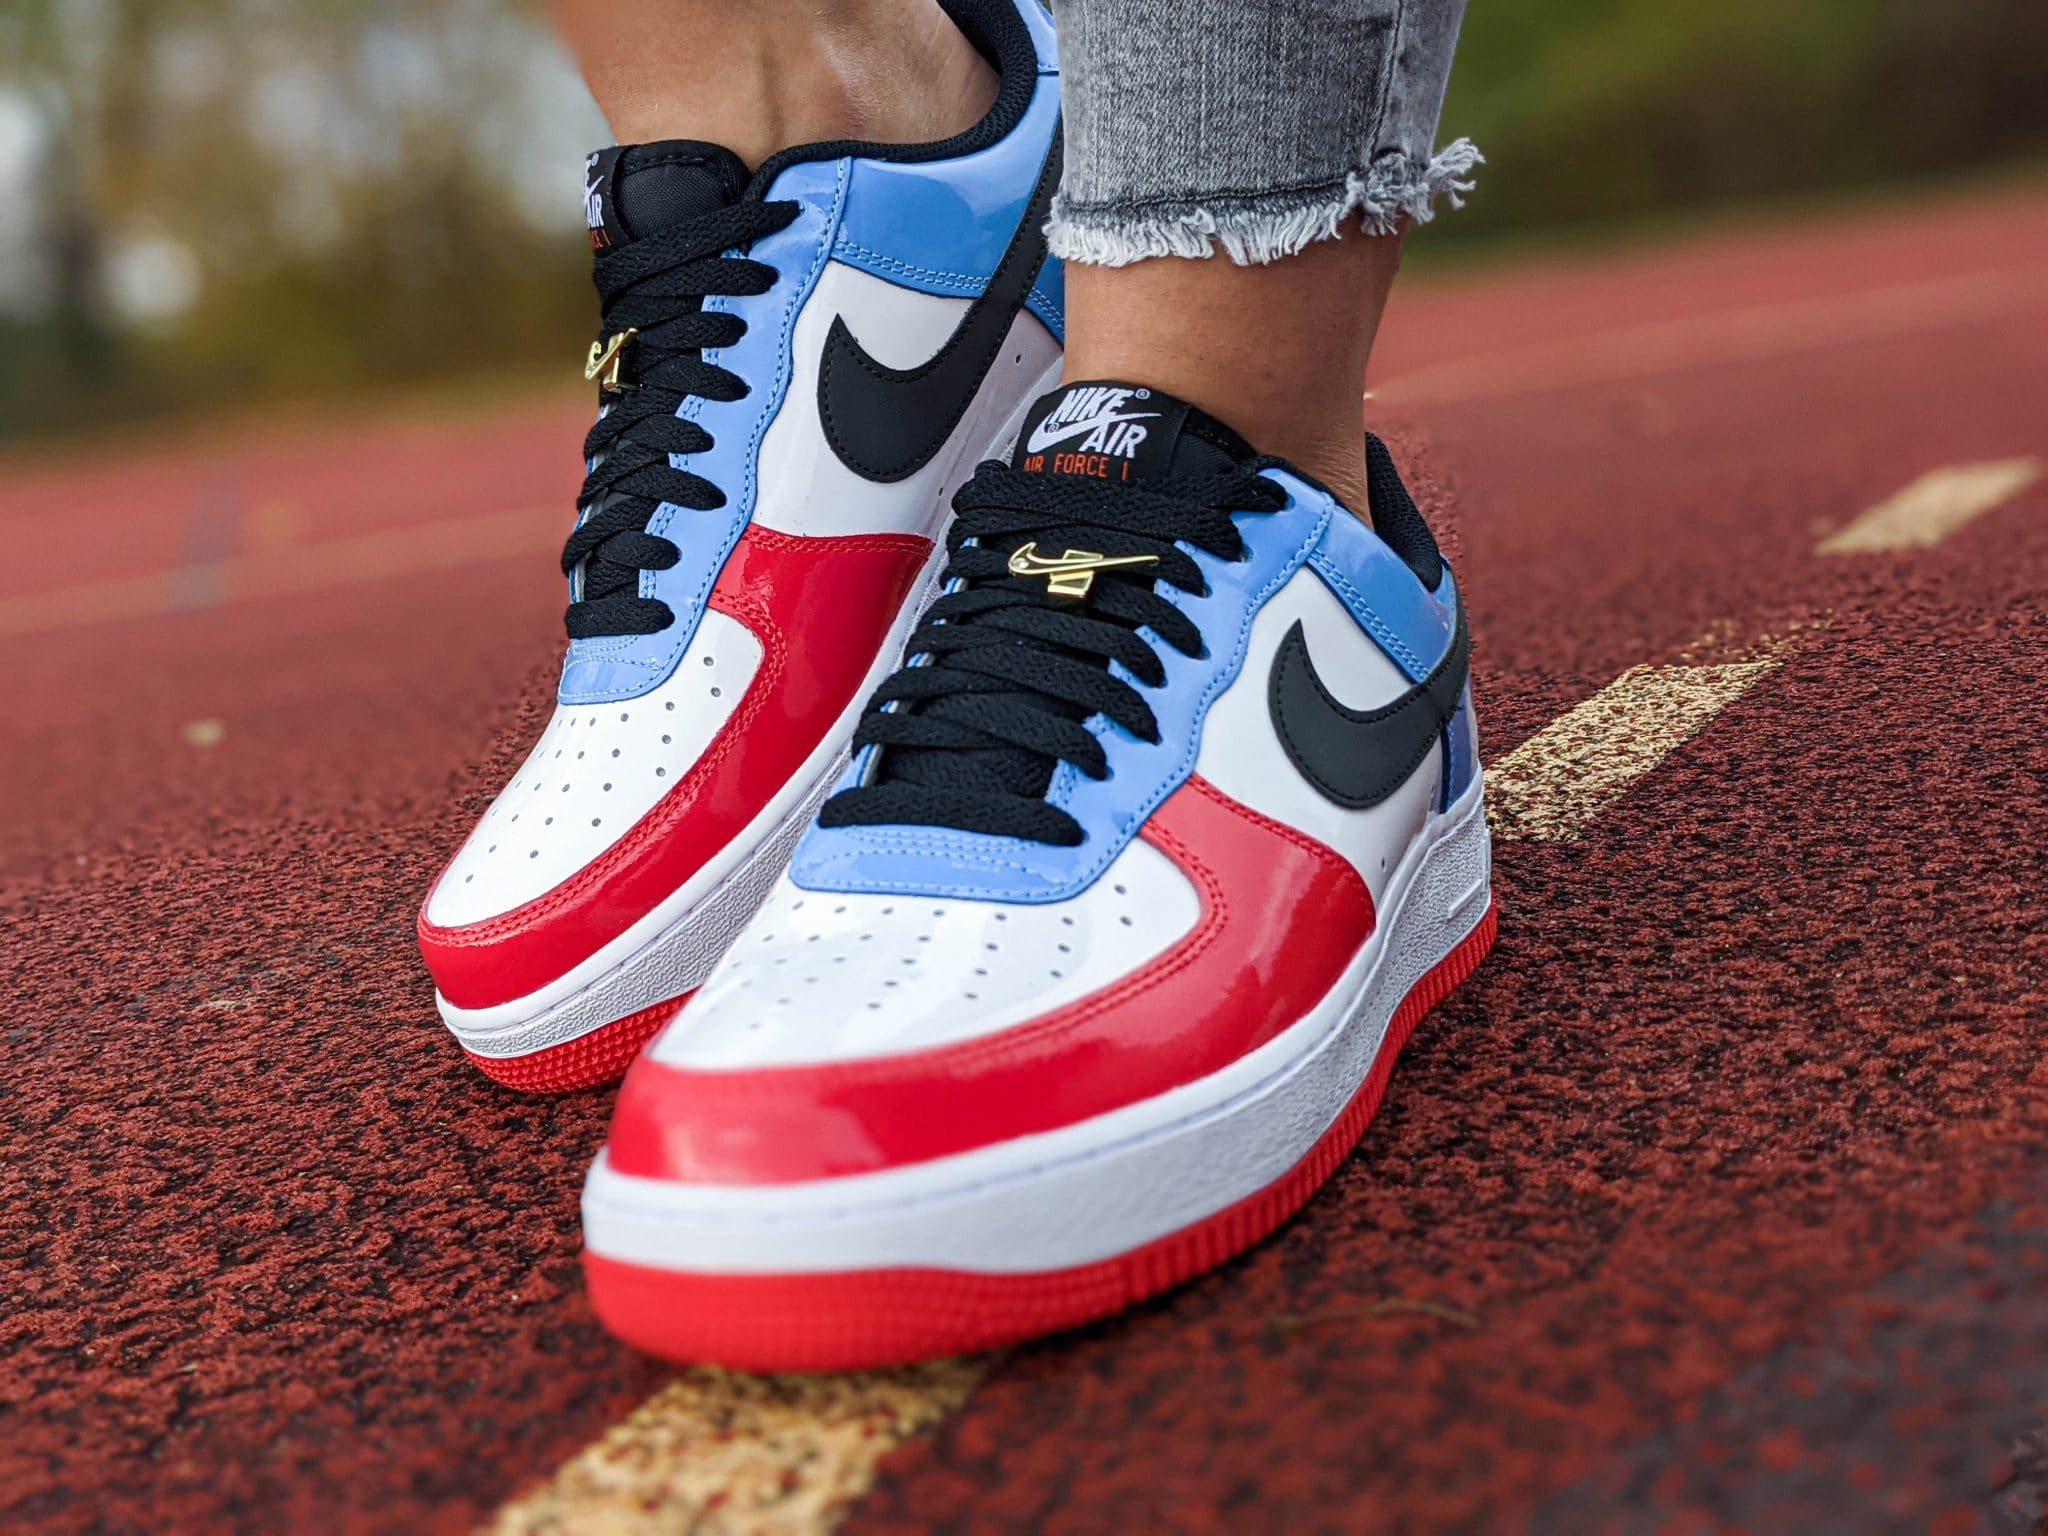 NIKENike Air Force 1 unlocked by you